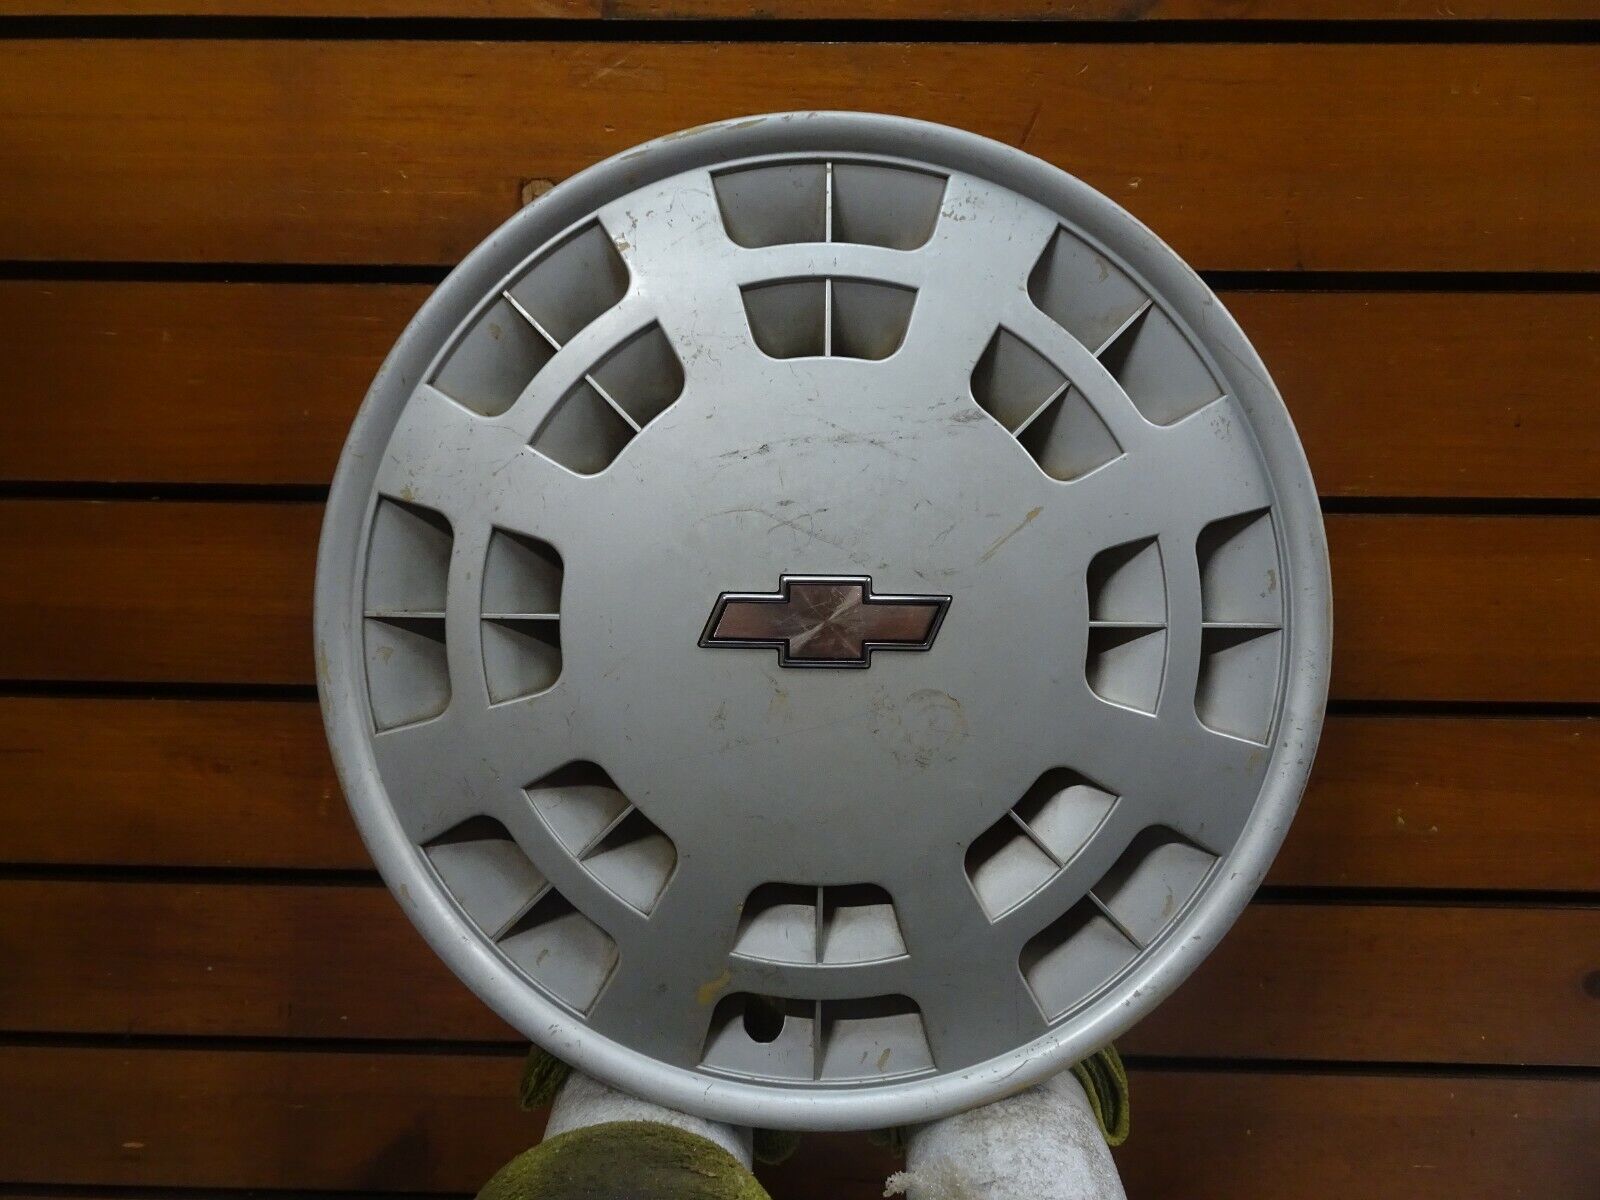 One Genuine 1991 1992 Chevy Caprice 15 Inch Hubcap Wheel Cover